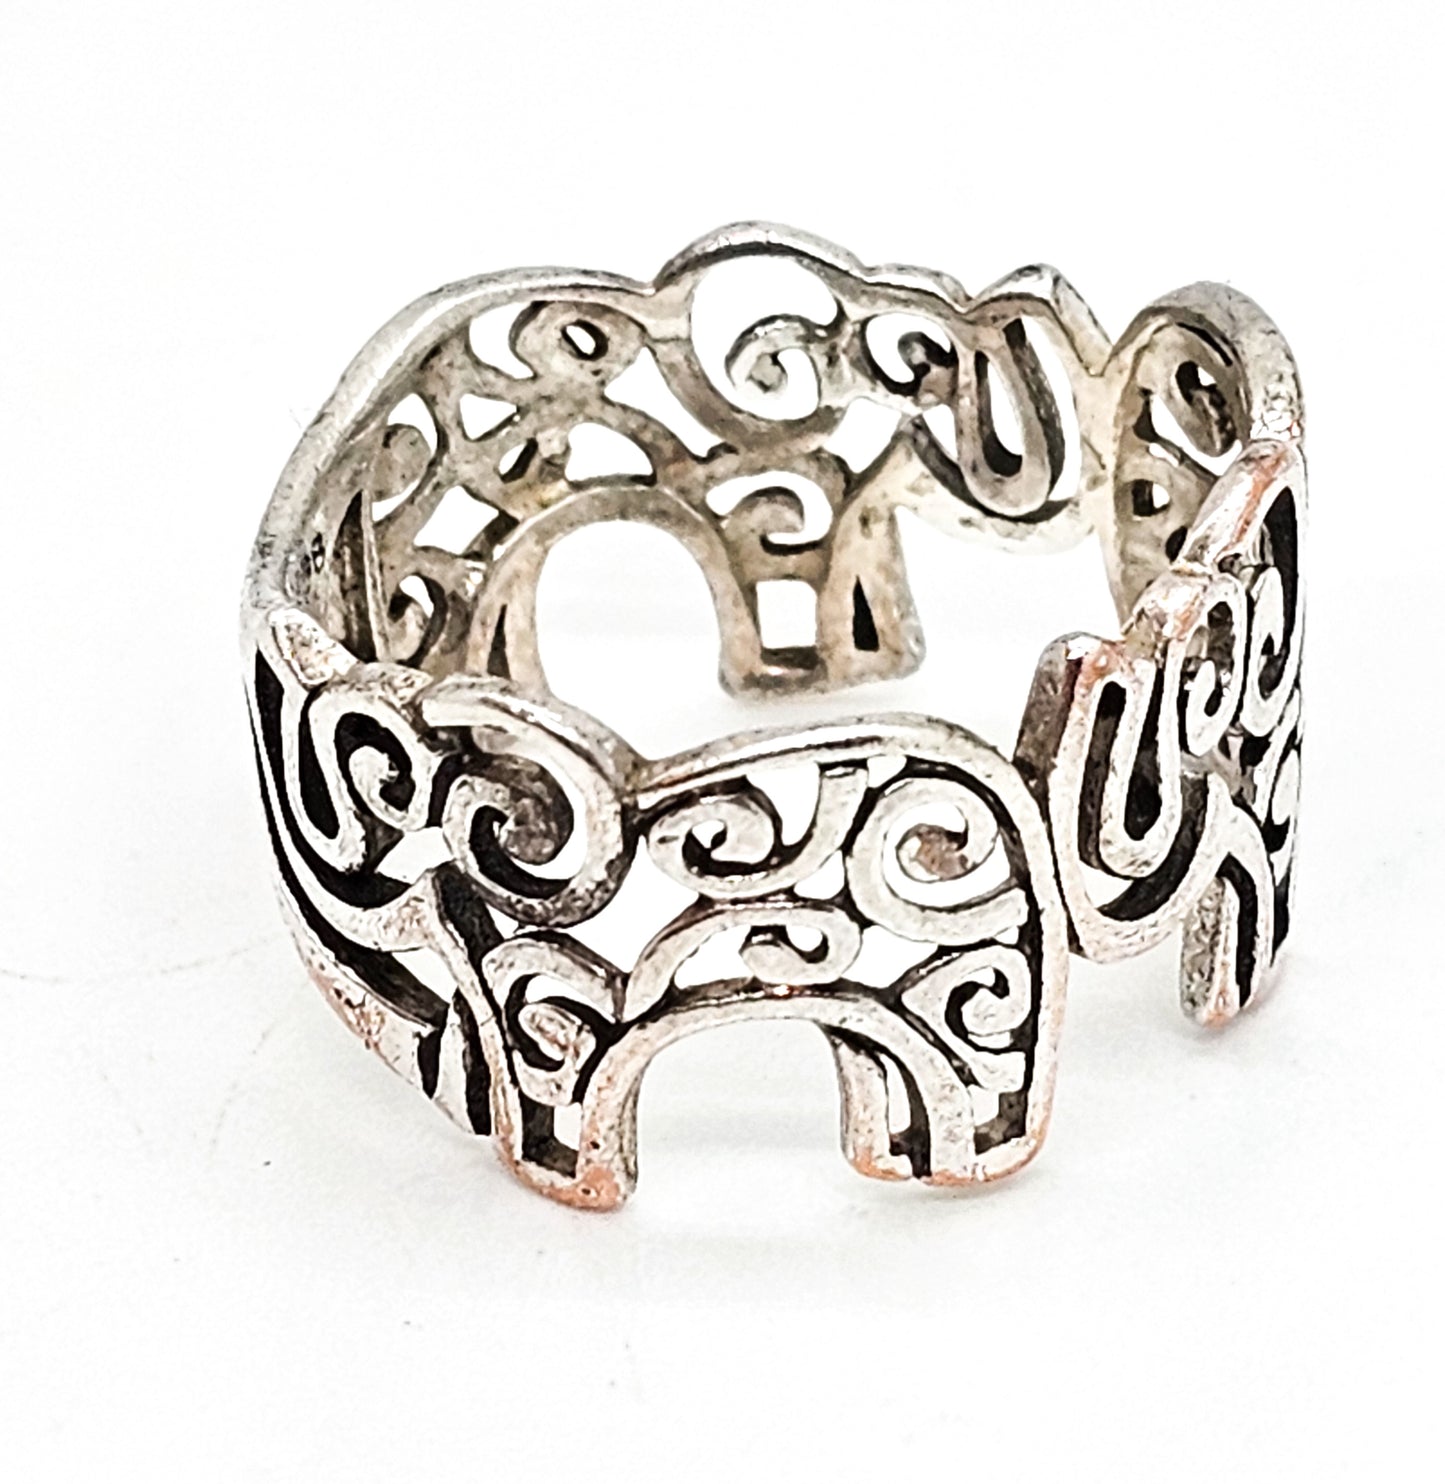 Filigree Elephant Good Luck Trunk vintage open work sterling silver ring size 8